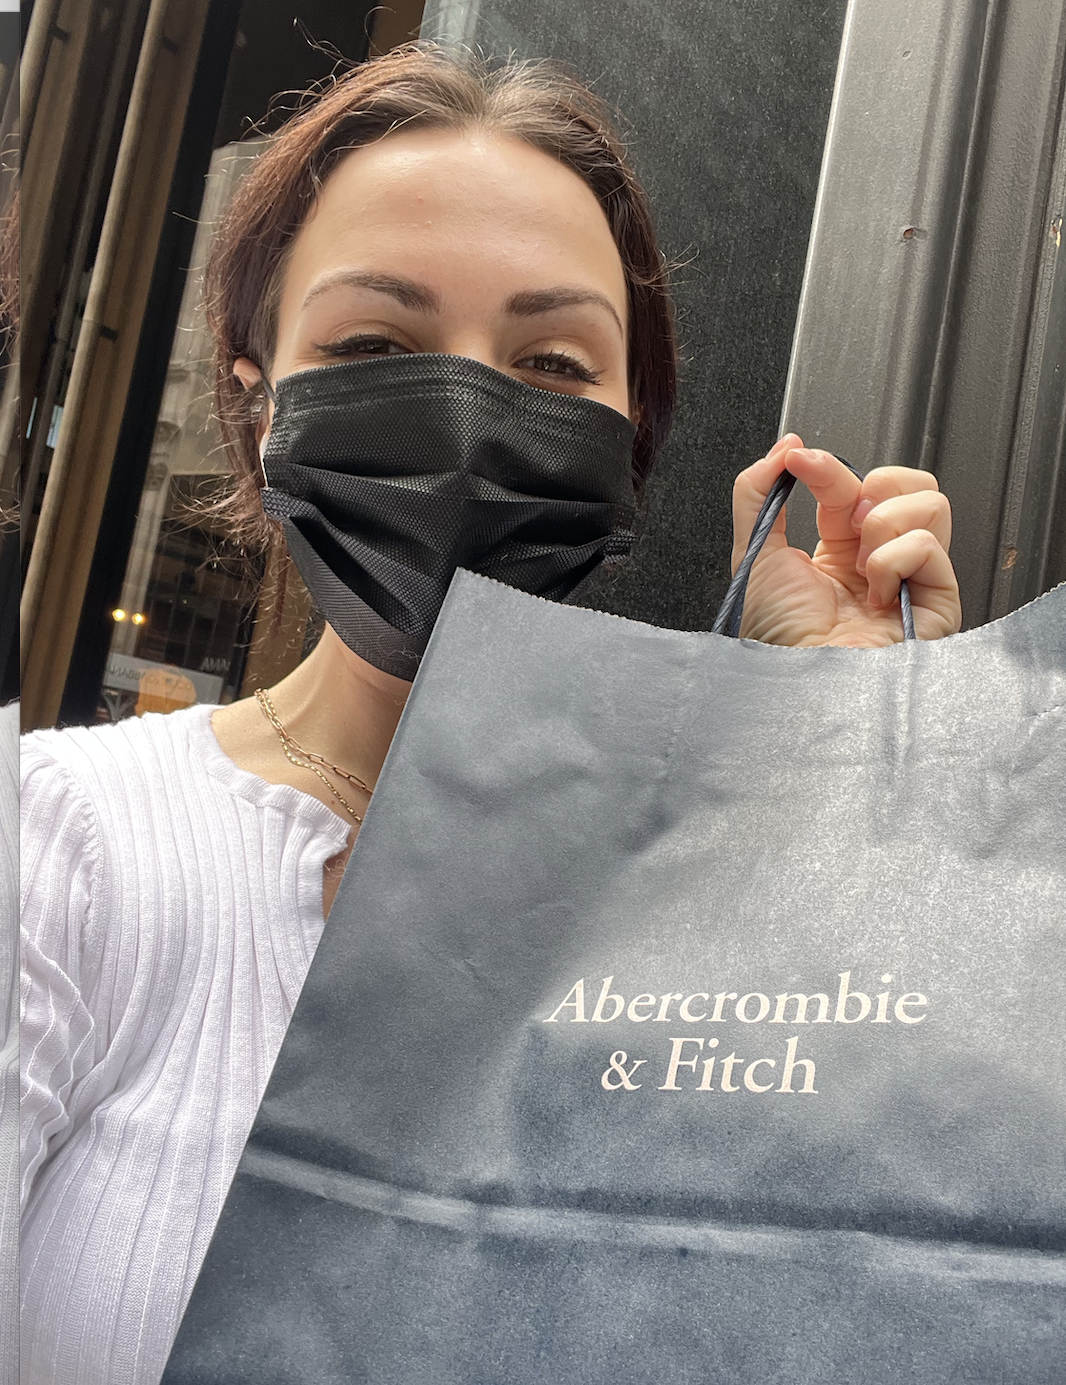 Me holding an A&amp;amp;F bag